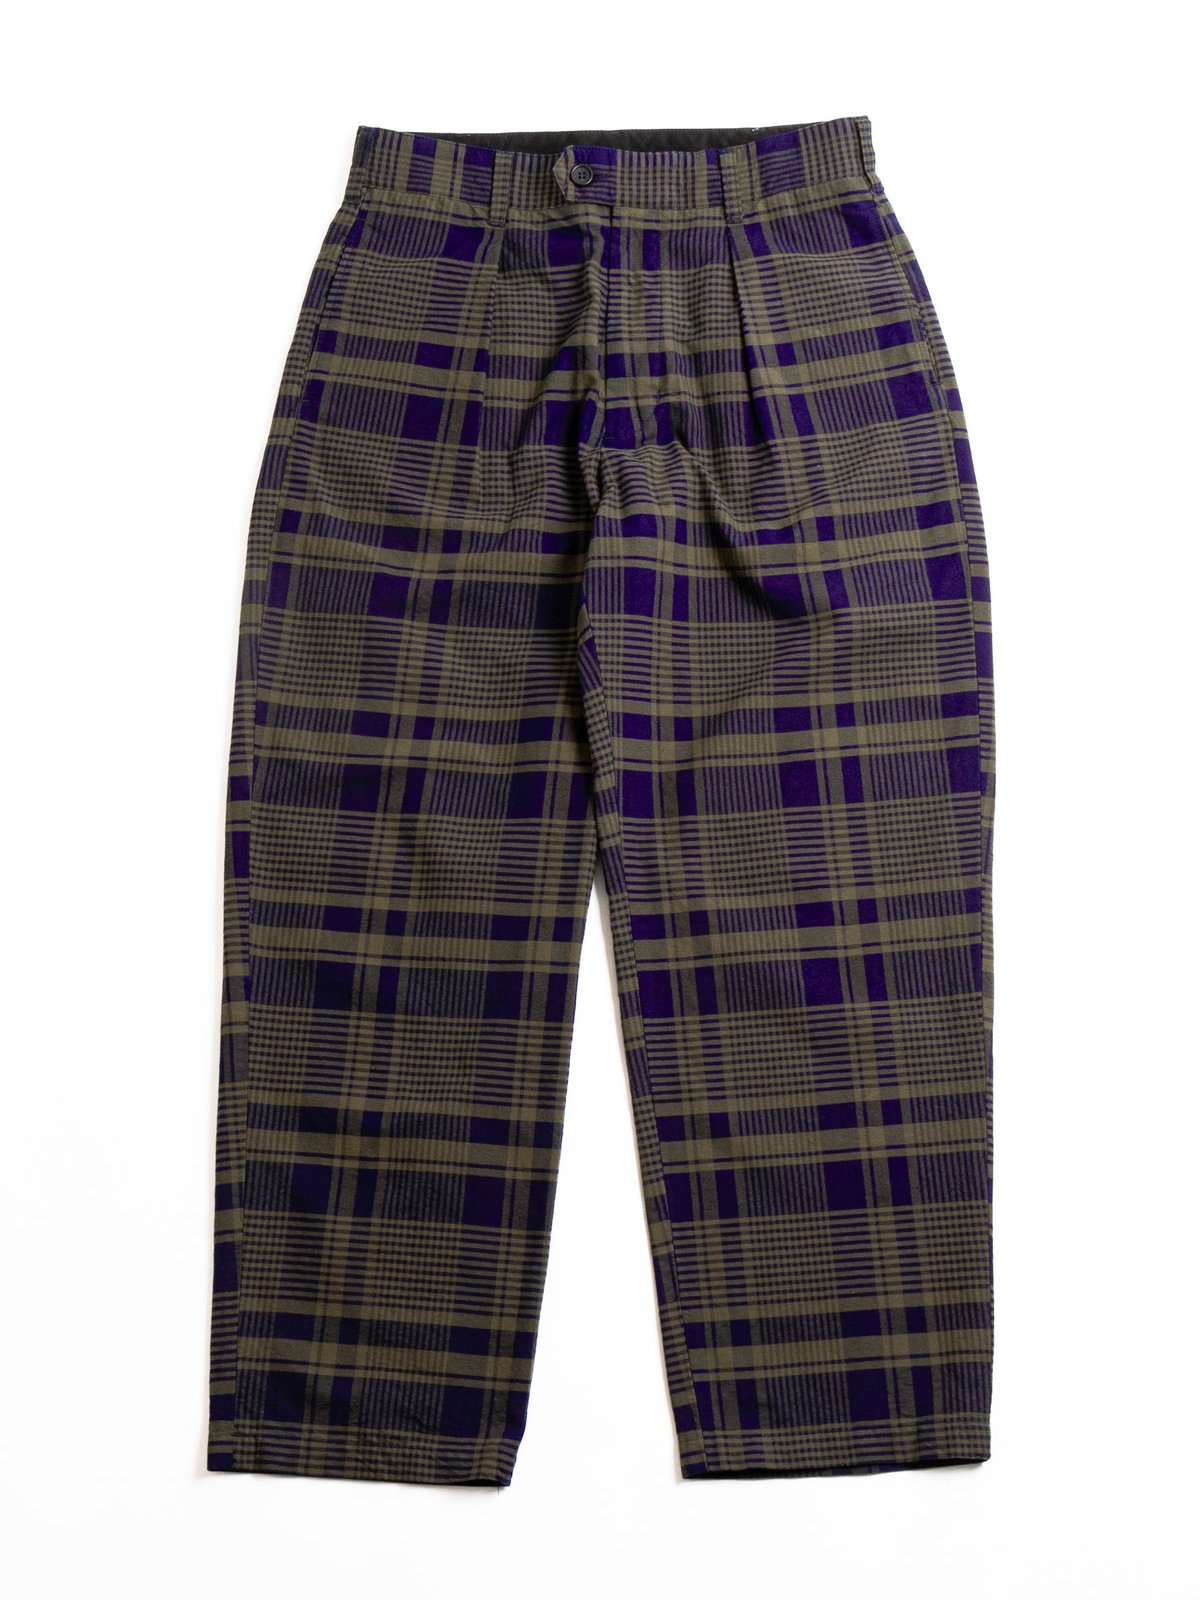 CARLYLE PANT NAVY/OLIVE COTTON PLAID - Image 1